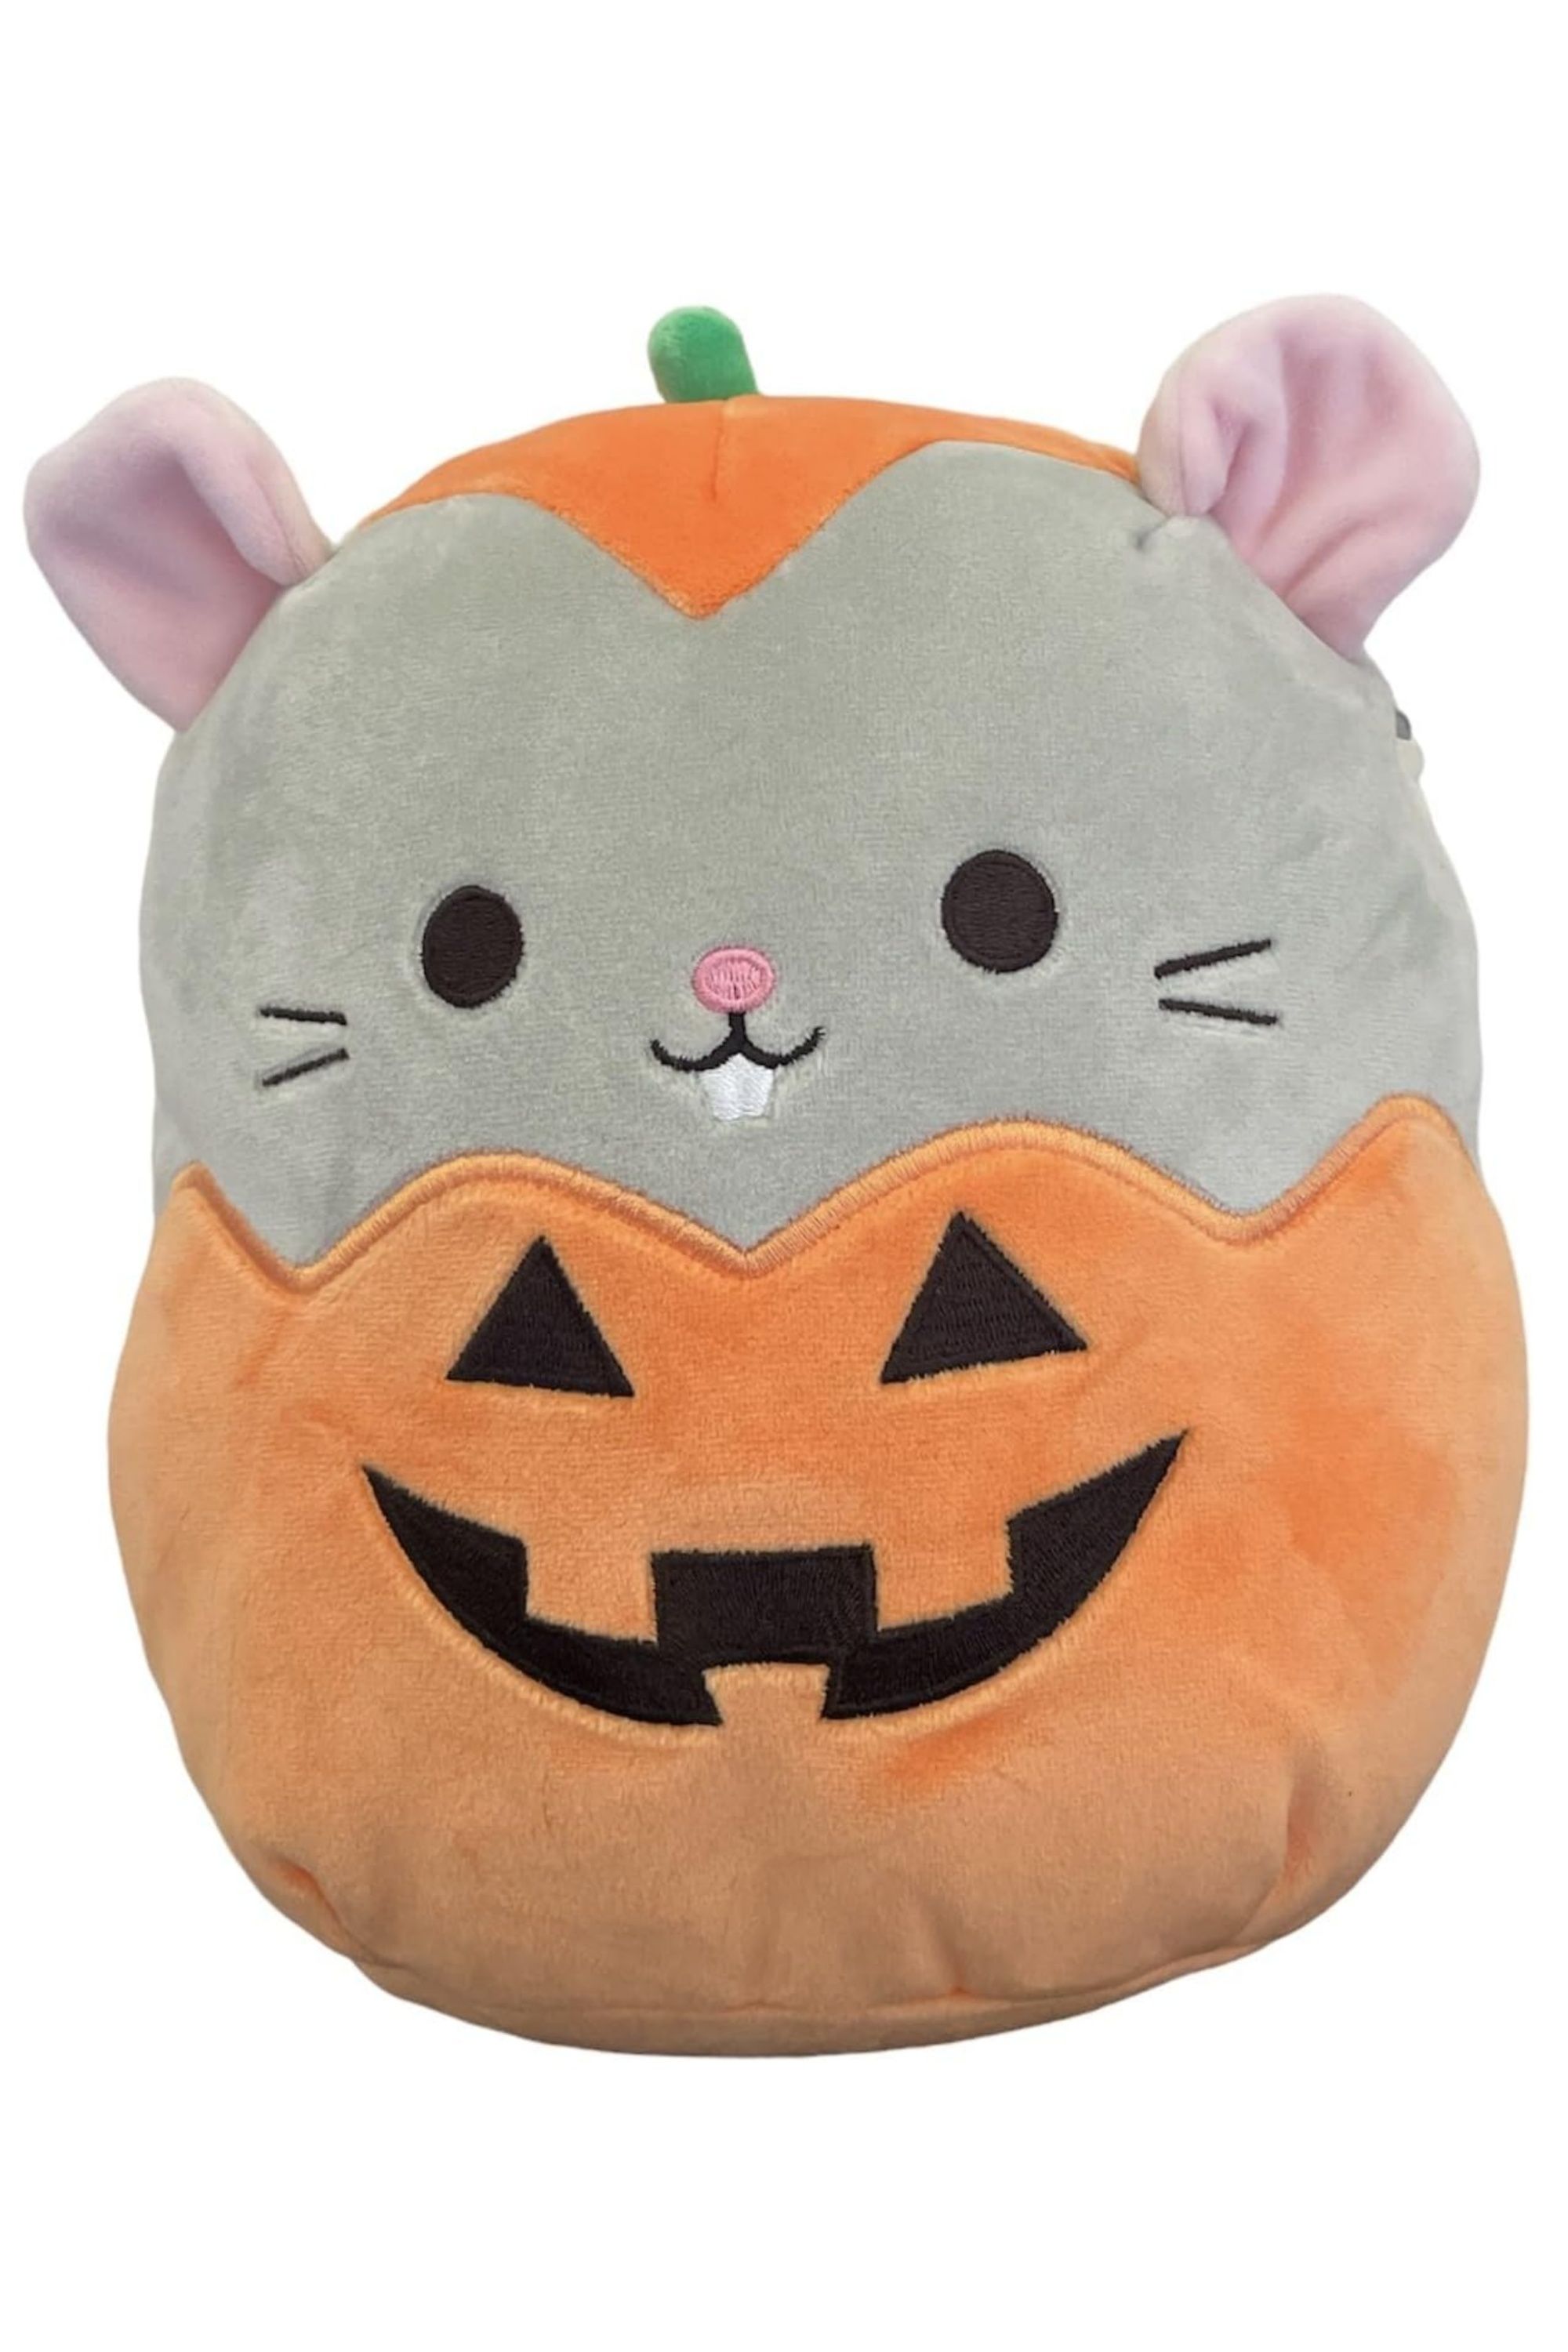 Spooks and Snuggles—Here Are the 15 Best Halloween Squishmallows